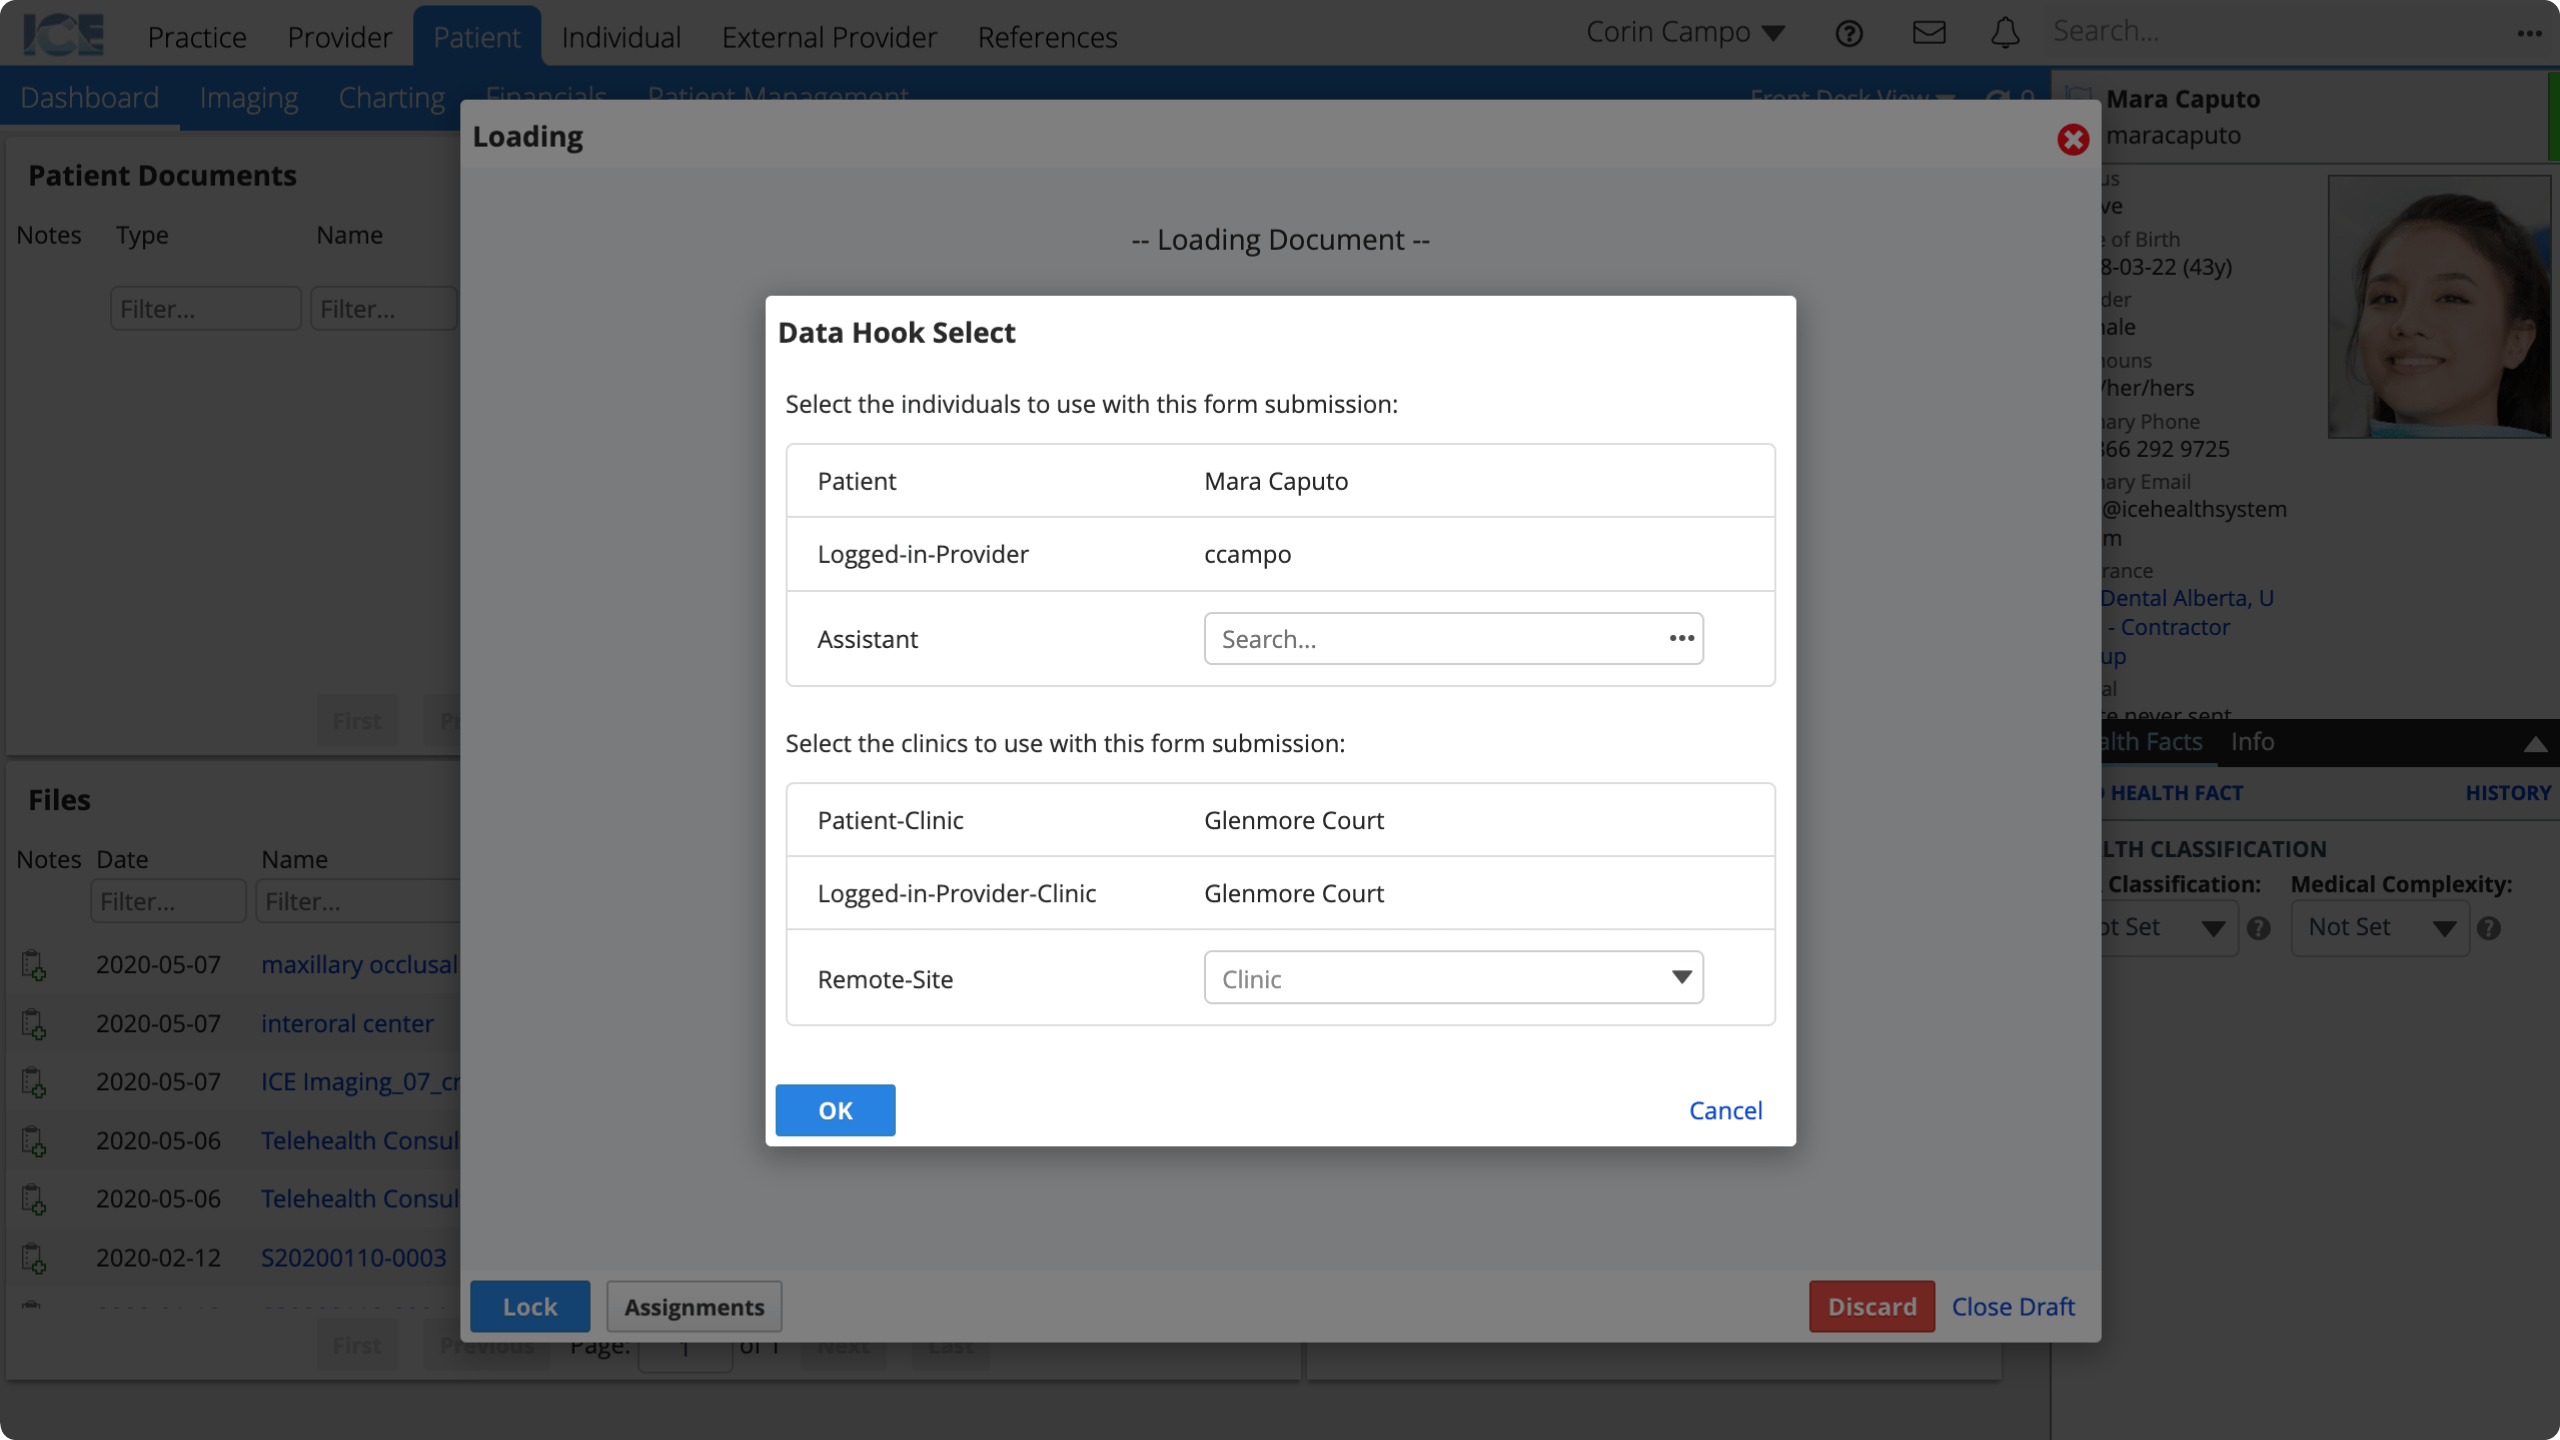 The data hook select dialog shows a section for people up top and one for clinics below. It also displays the system-default data hook type selections